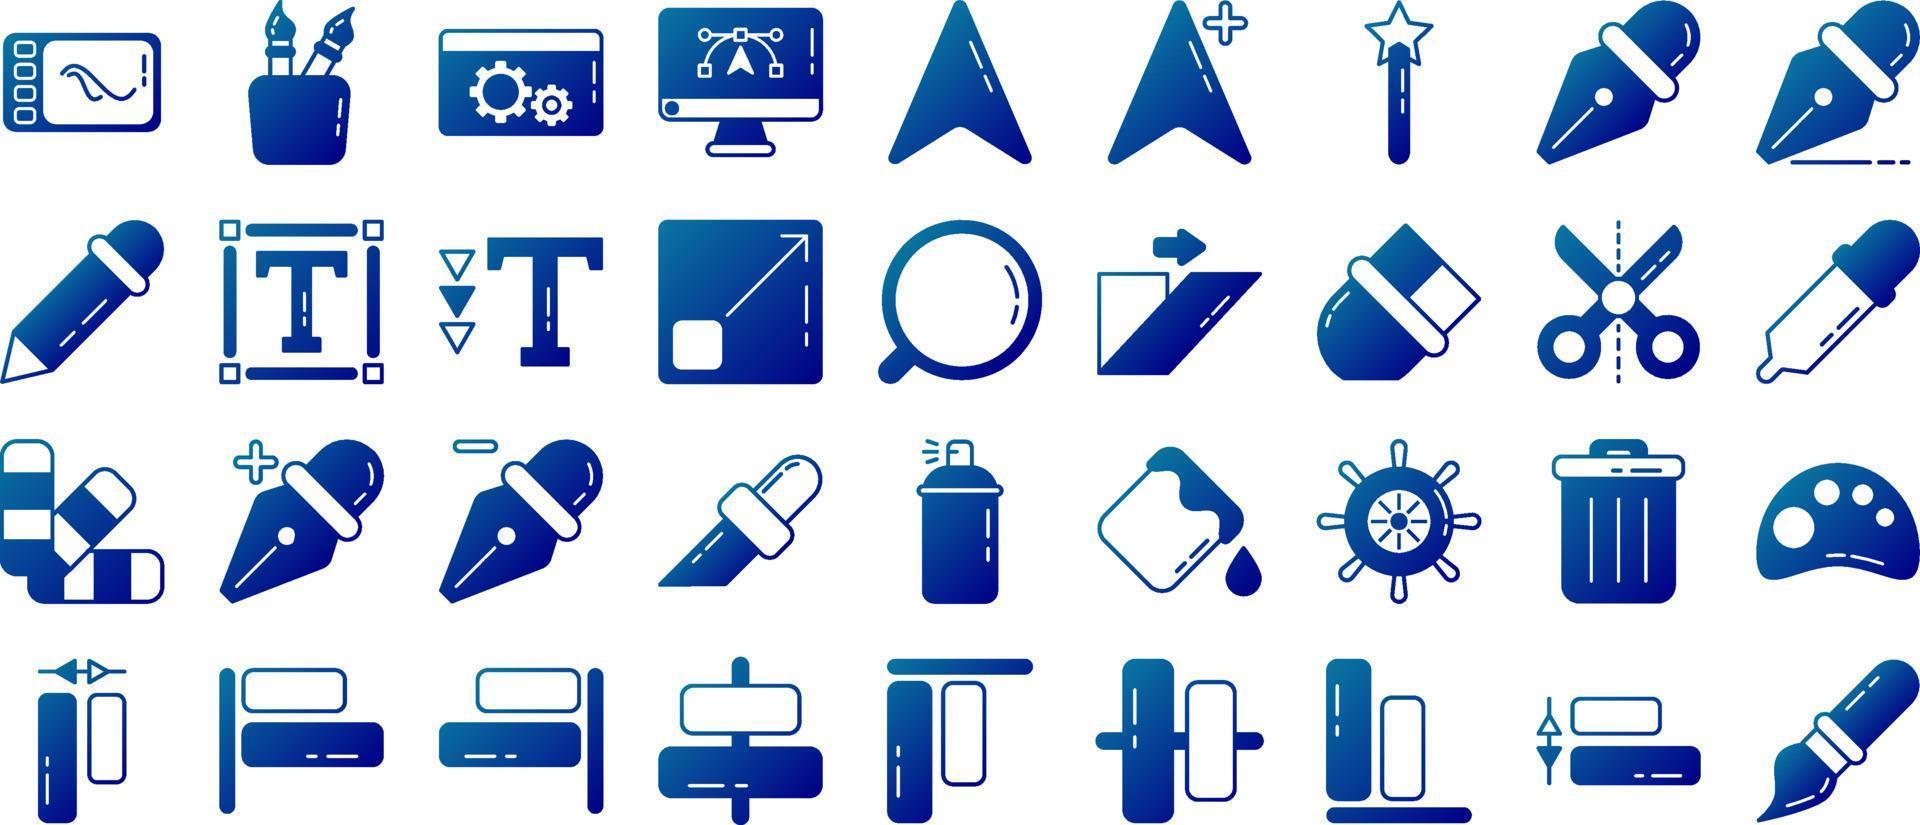 set of editors and tools icons with transparent background vector